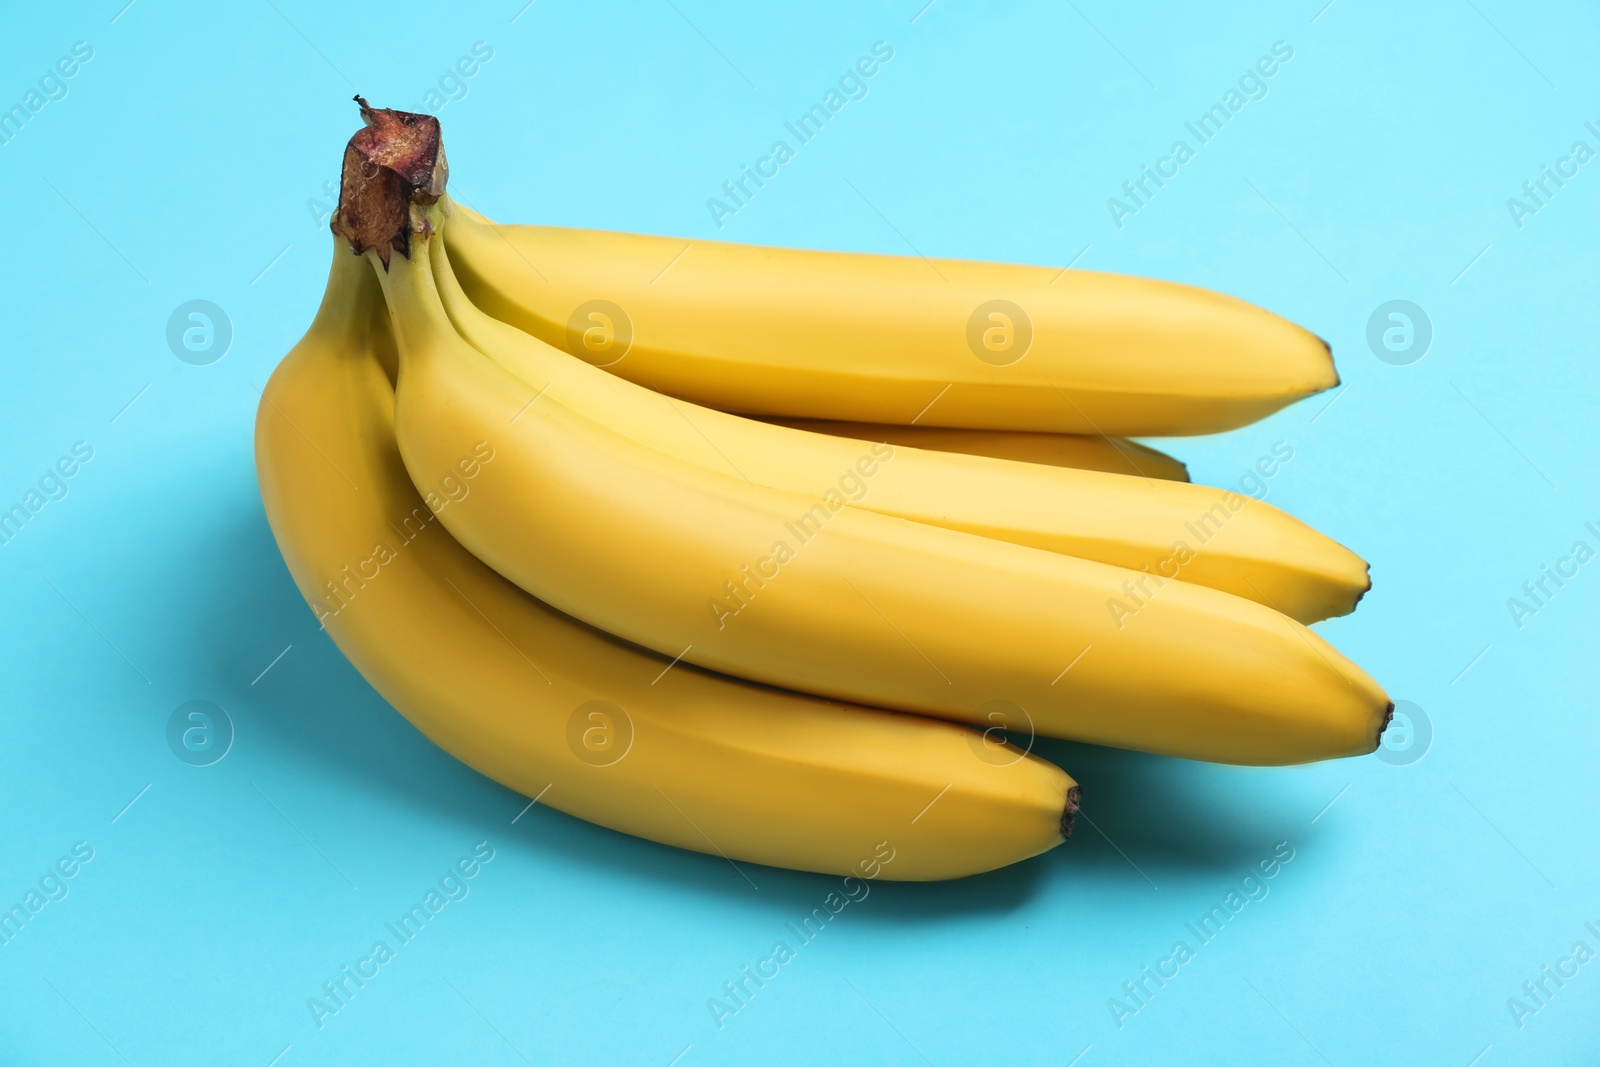 Photo of Bunch of ripe yellow bananas on turquoise background